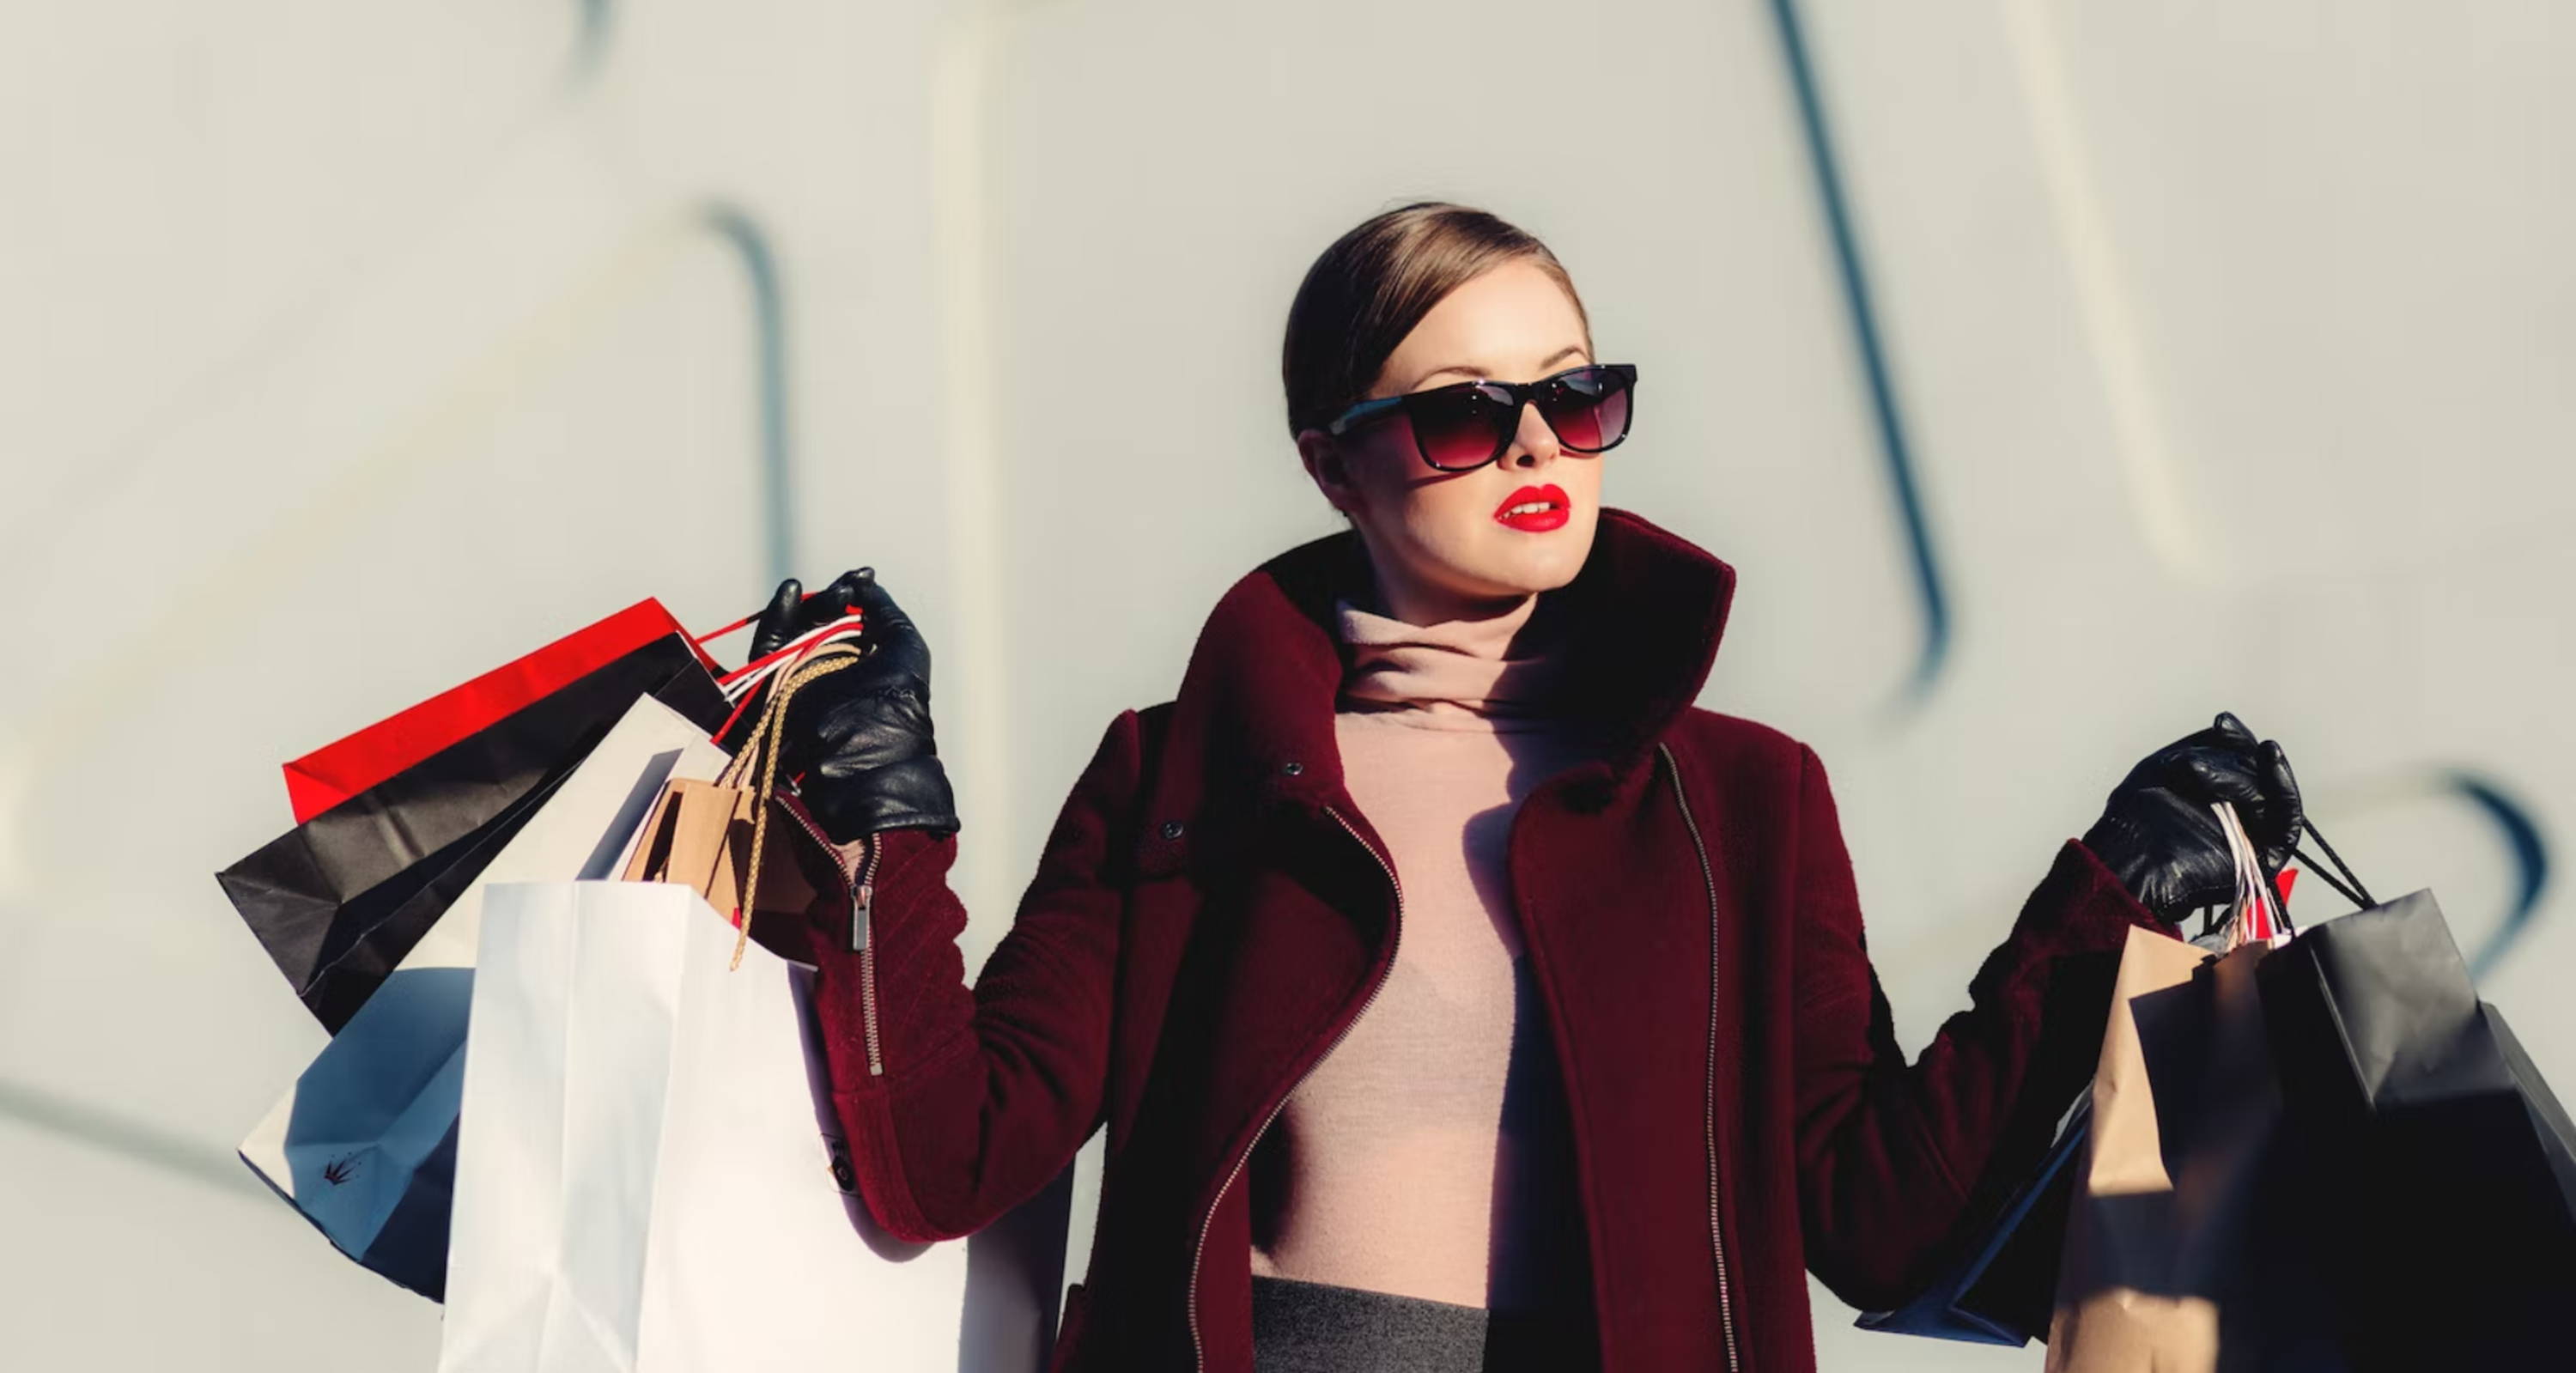 woman in sunglasses and red lipstick holding many shopping bags